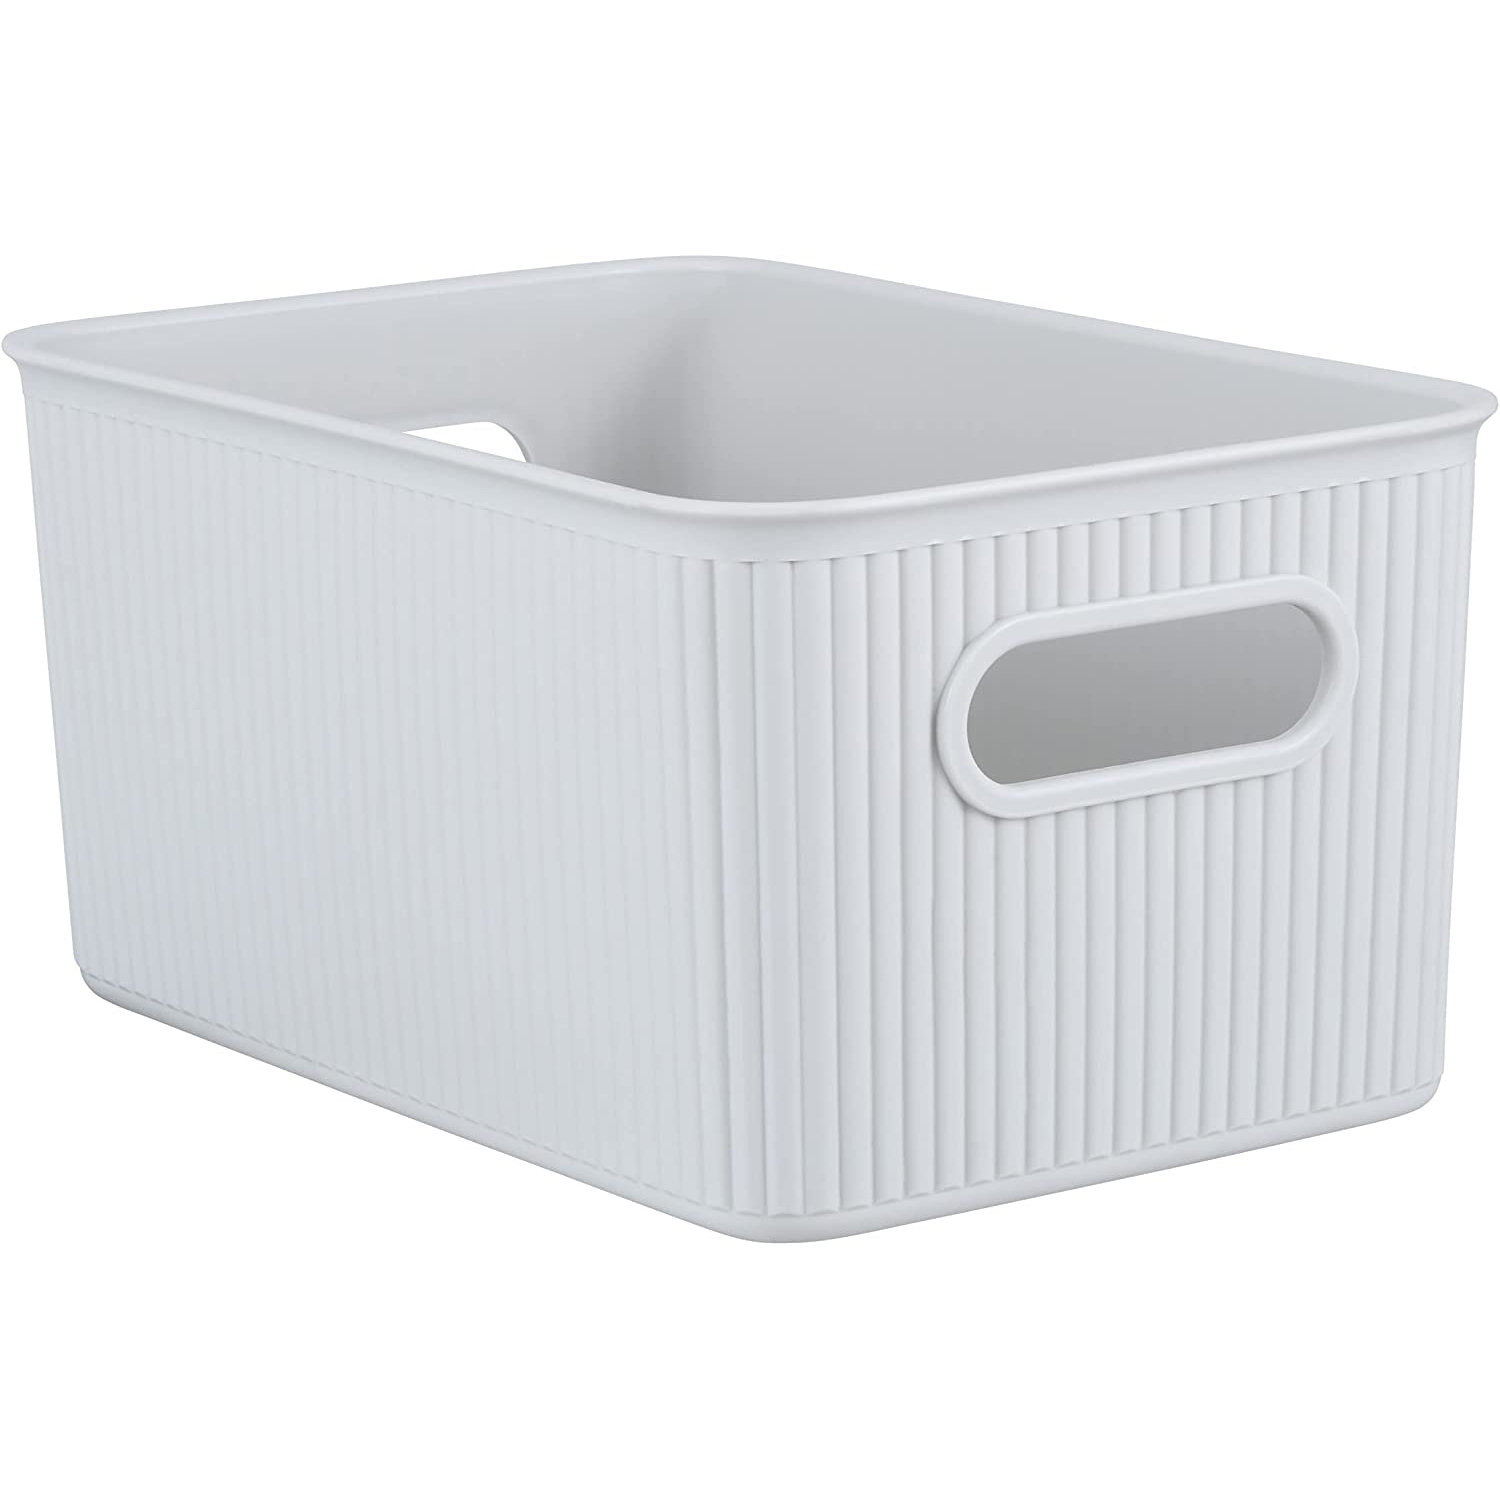 Superio Ribbed Collection - Decorative Plastic Lidded Home Storage Bins  Organizer Baskets, X-Large White (2 Pack - 22 Liter) Stackable Container  Box